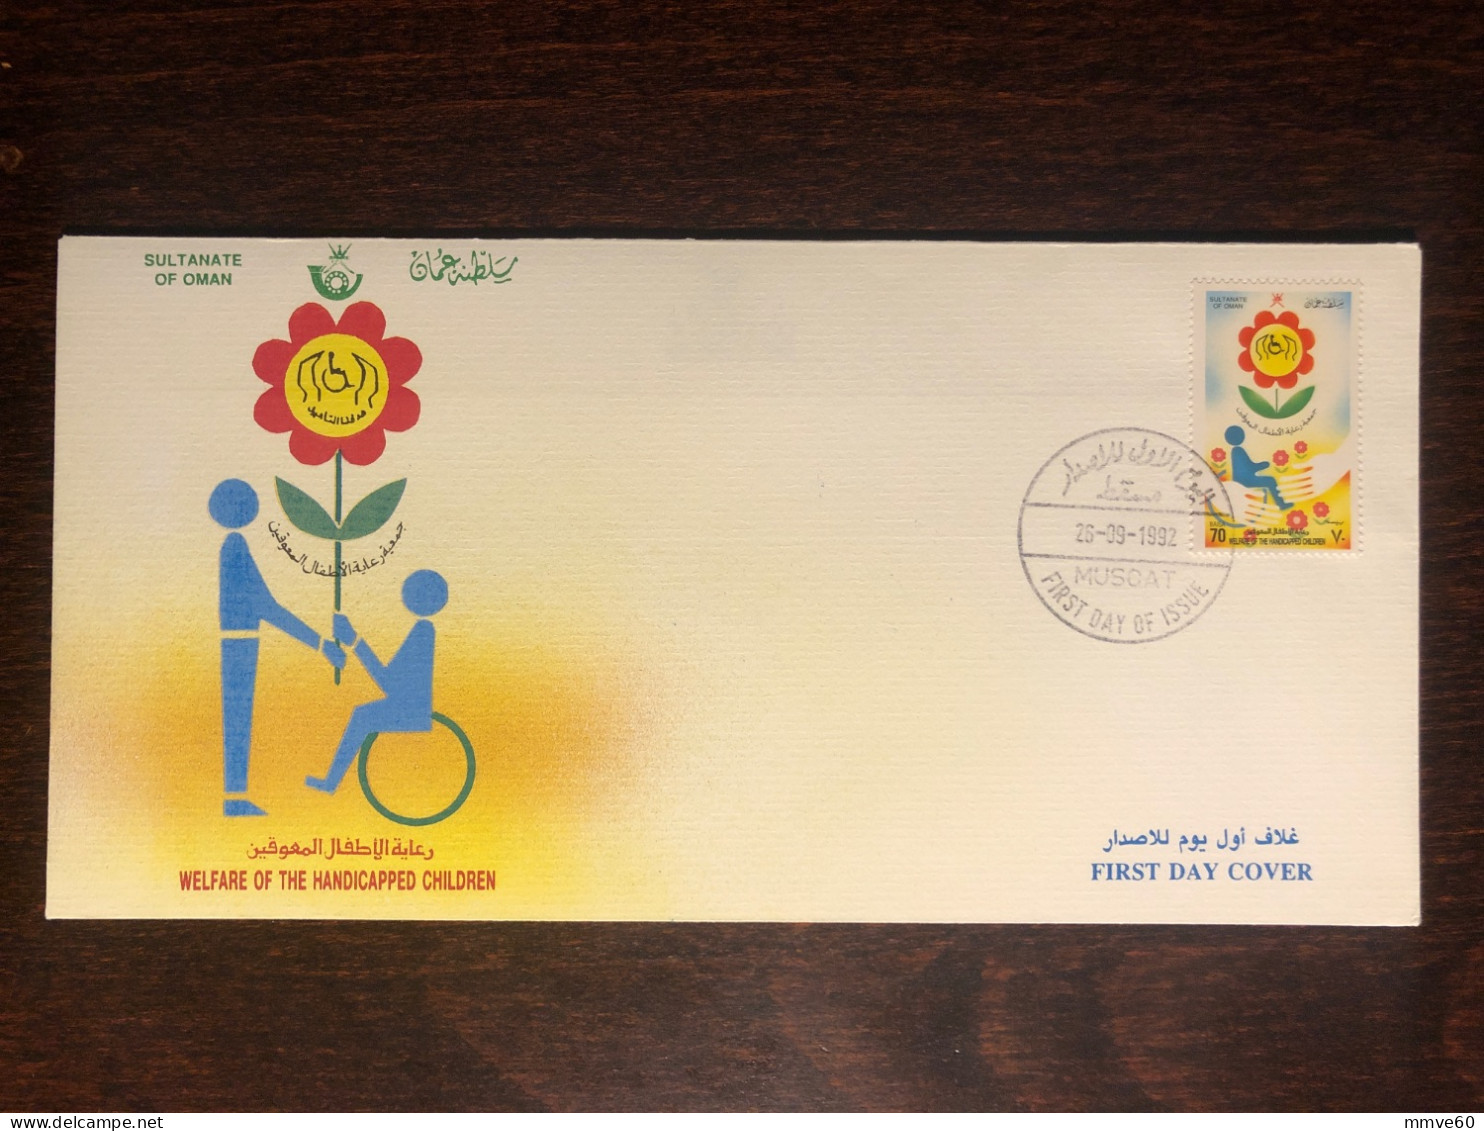 OMAN FDC COVER 1992 YEAR DISABLED PEOPLE HEALTH MEDICINE STAMPS - Oman